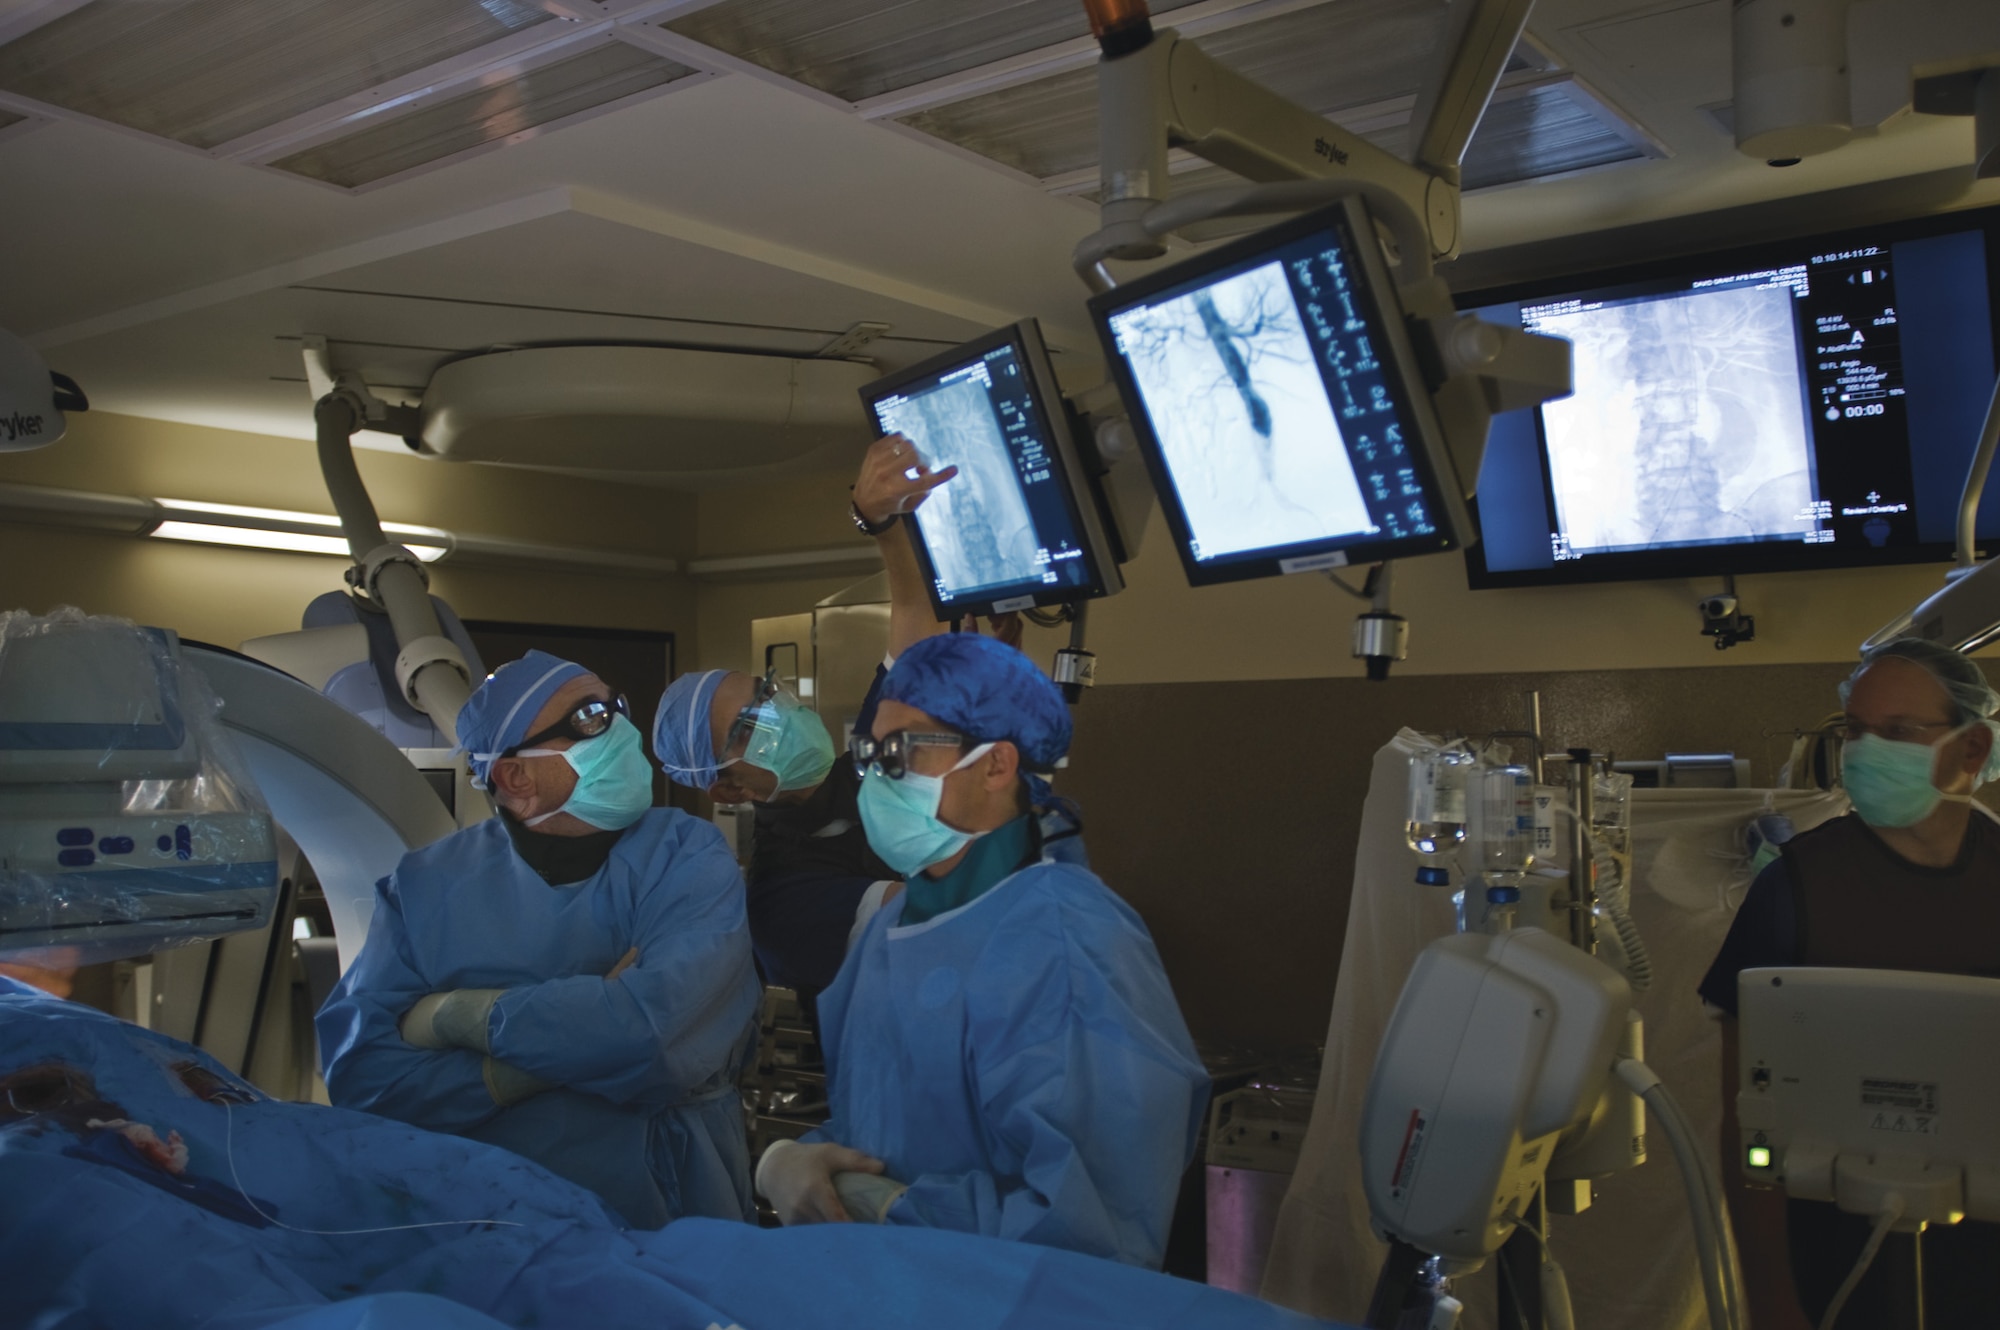 Vascular surgeons at the David Grant USAF Medical Center watch imagery produced by the C-arm of the Artis zeego during a procedure. (U.S. Air Force photo/Tech. Sgt. Bennie J. Davis III)